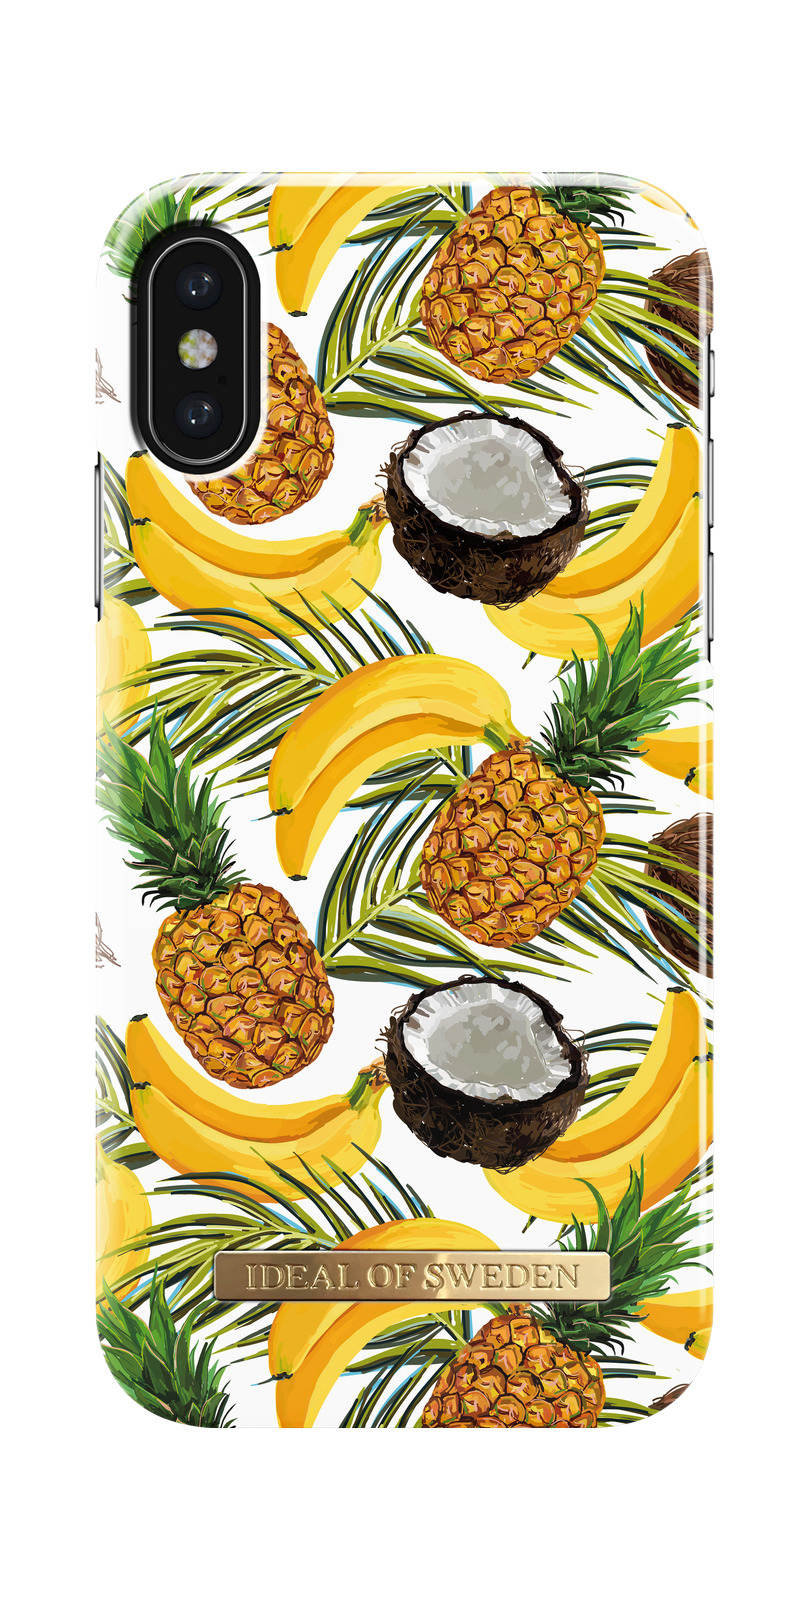 Fashion, Coconut Backcover, iPhone Apple, Banana X, SWEDEN OF IDEAL